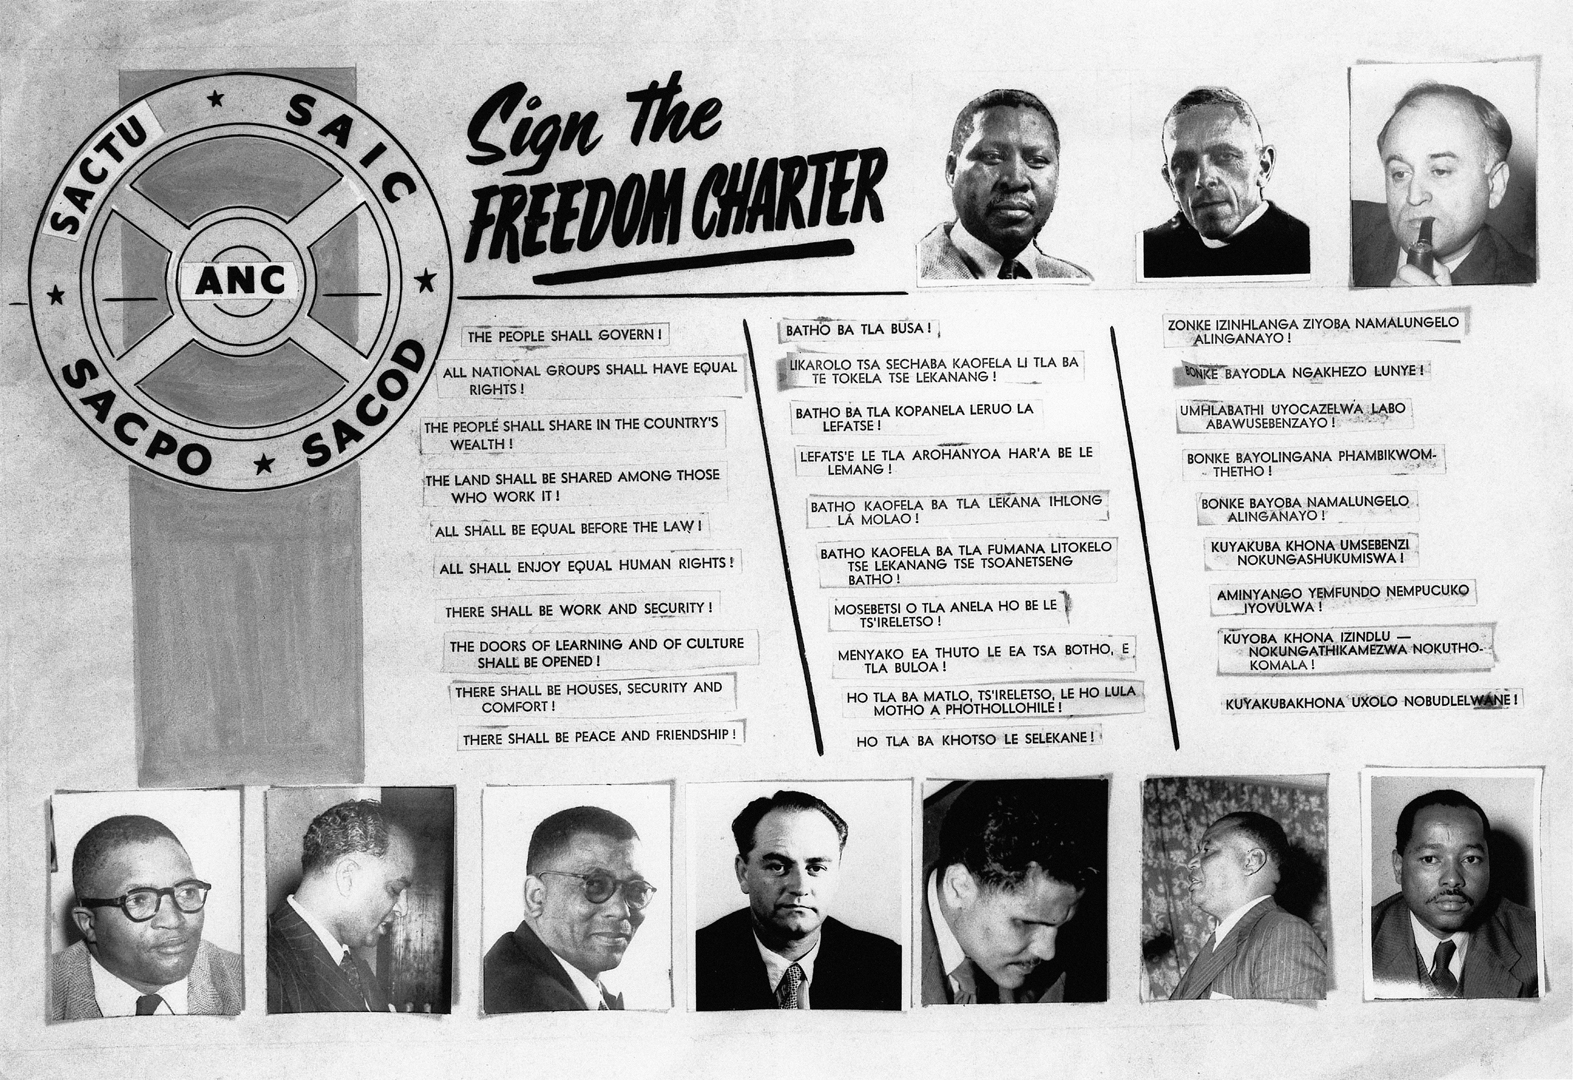 <p>The Congress of the People, a mass gathering of progressive organisations from across the country, adopts the Freedom Charter. The apartheid state responds by arresting 156 leaders in 1956 and trying them for high treason. By 1961, all 156 will have been acquitted.</p>